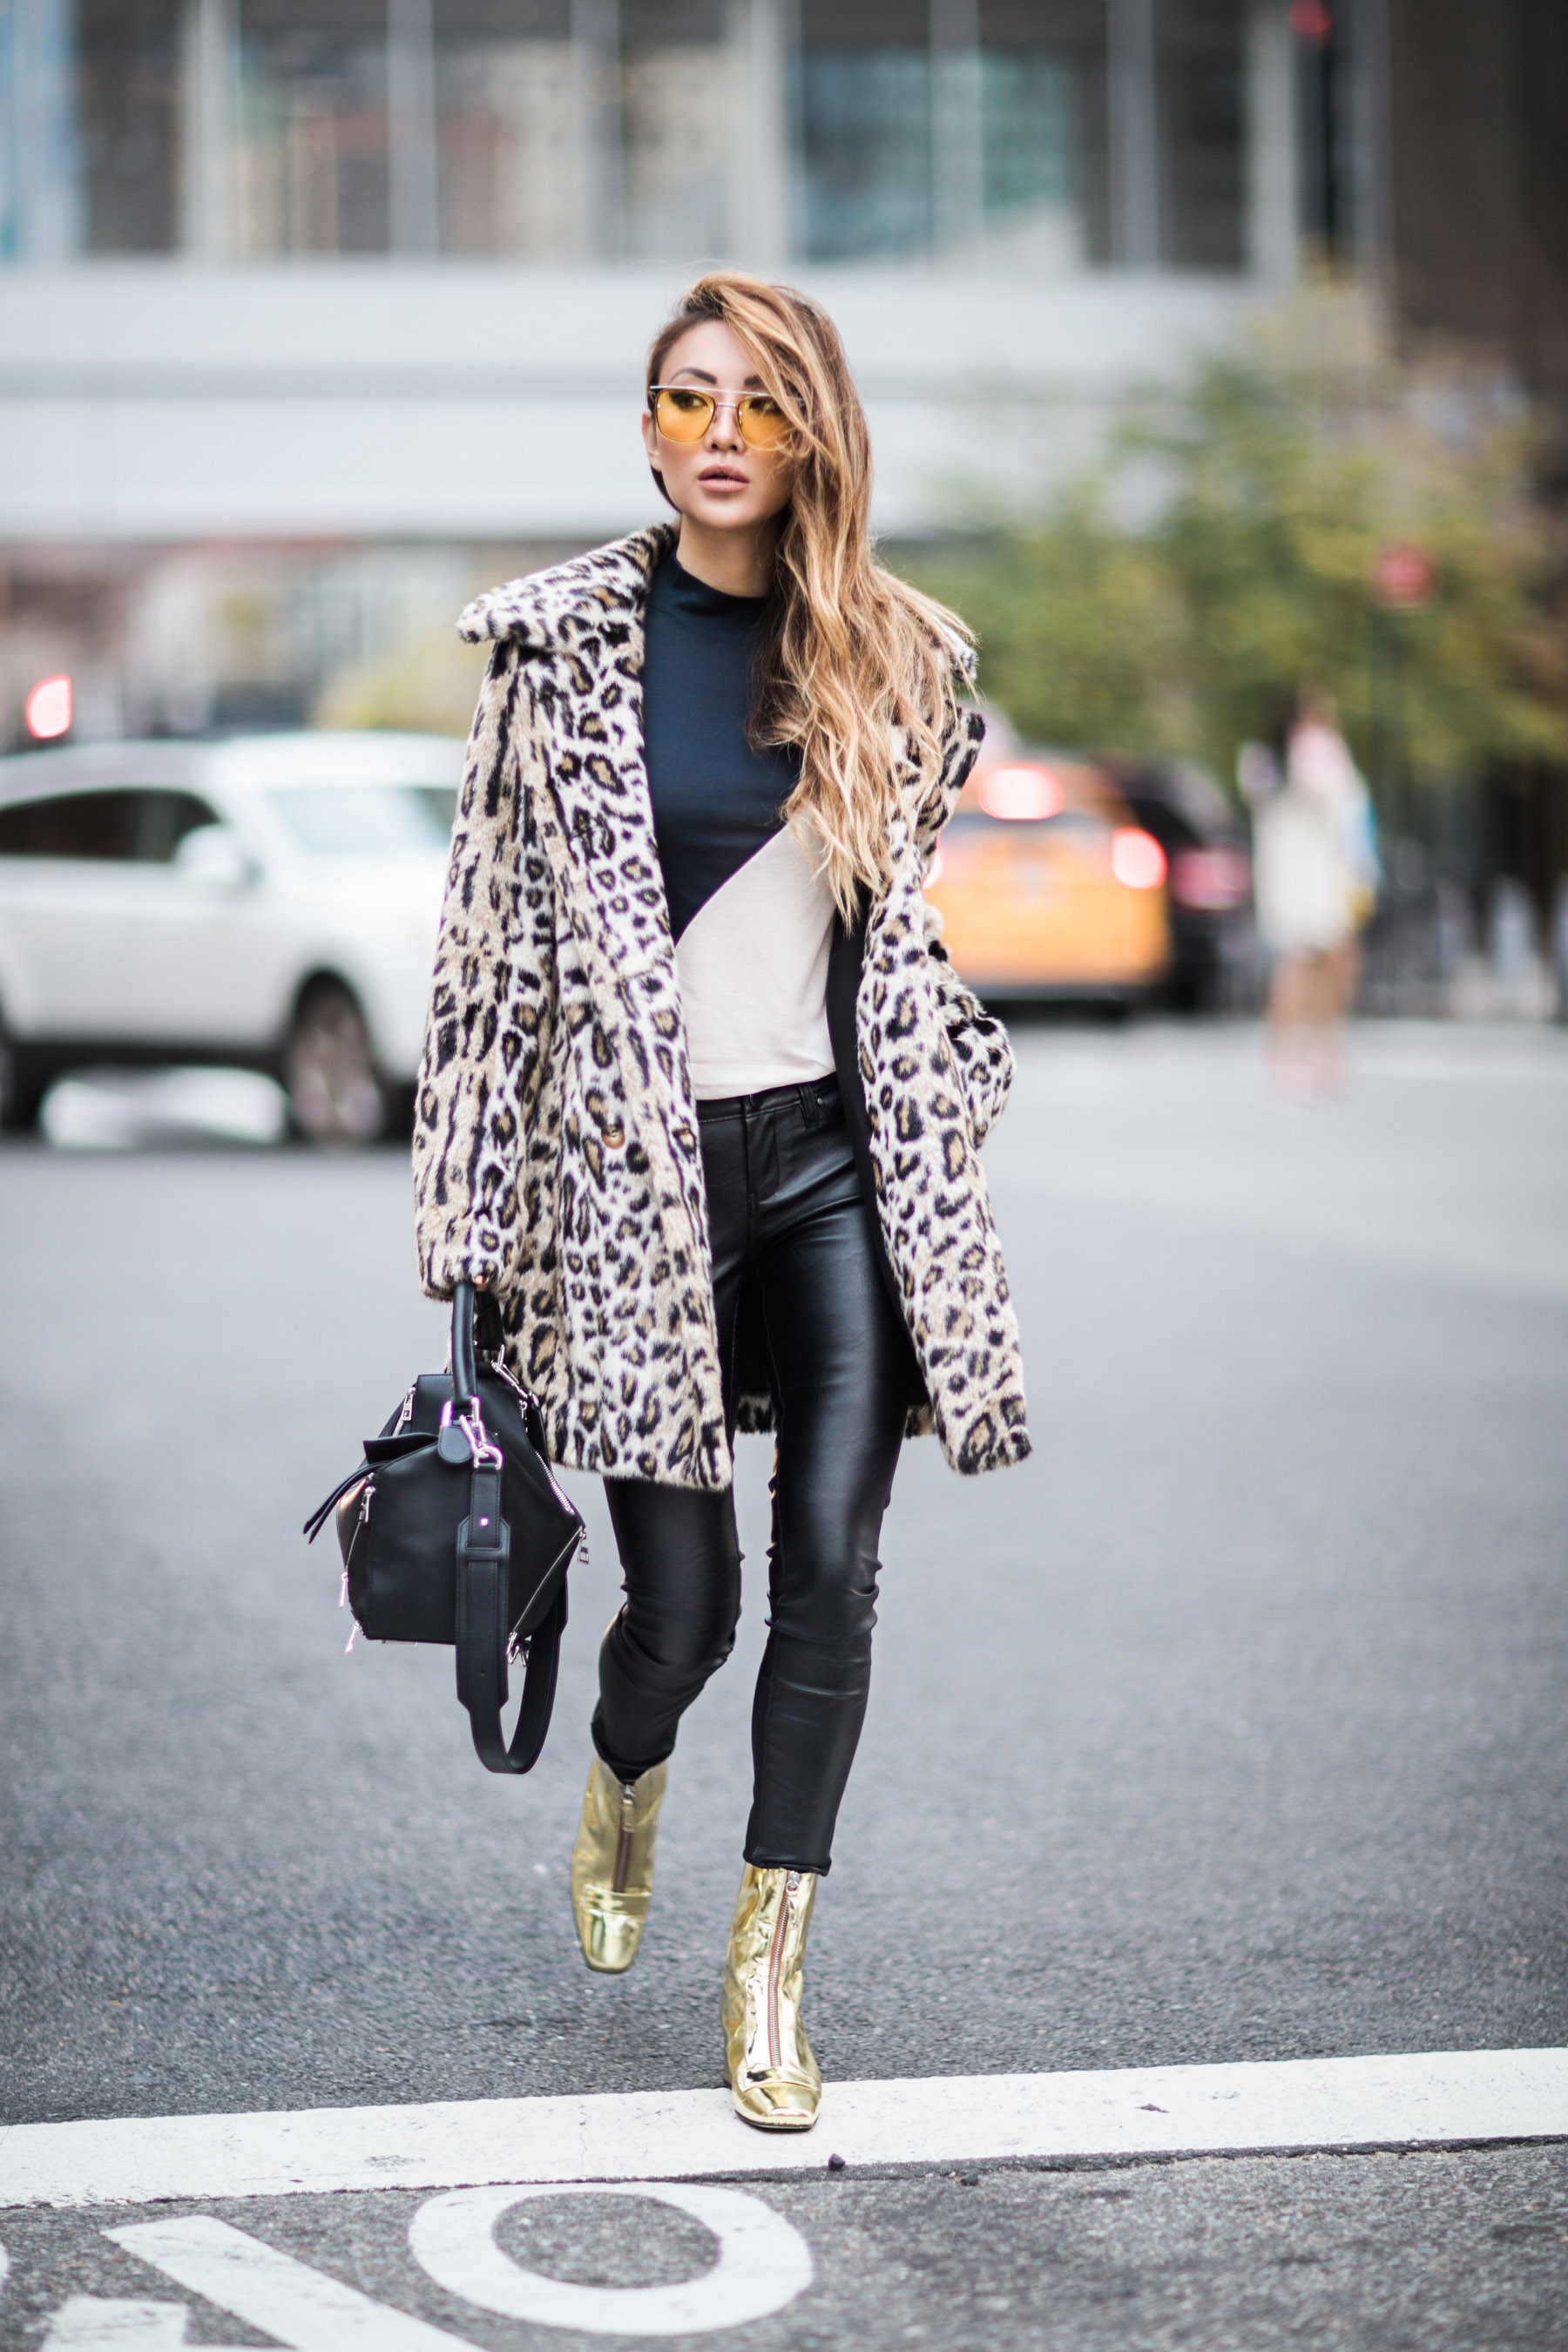 How to Master the Art of Layering this Fall // NotJessFashion.com